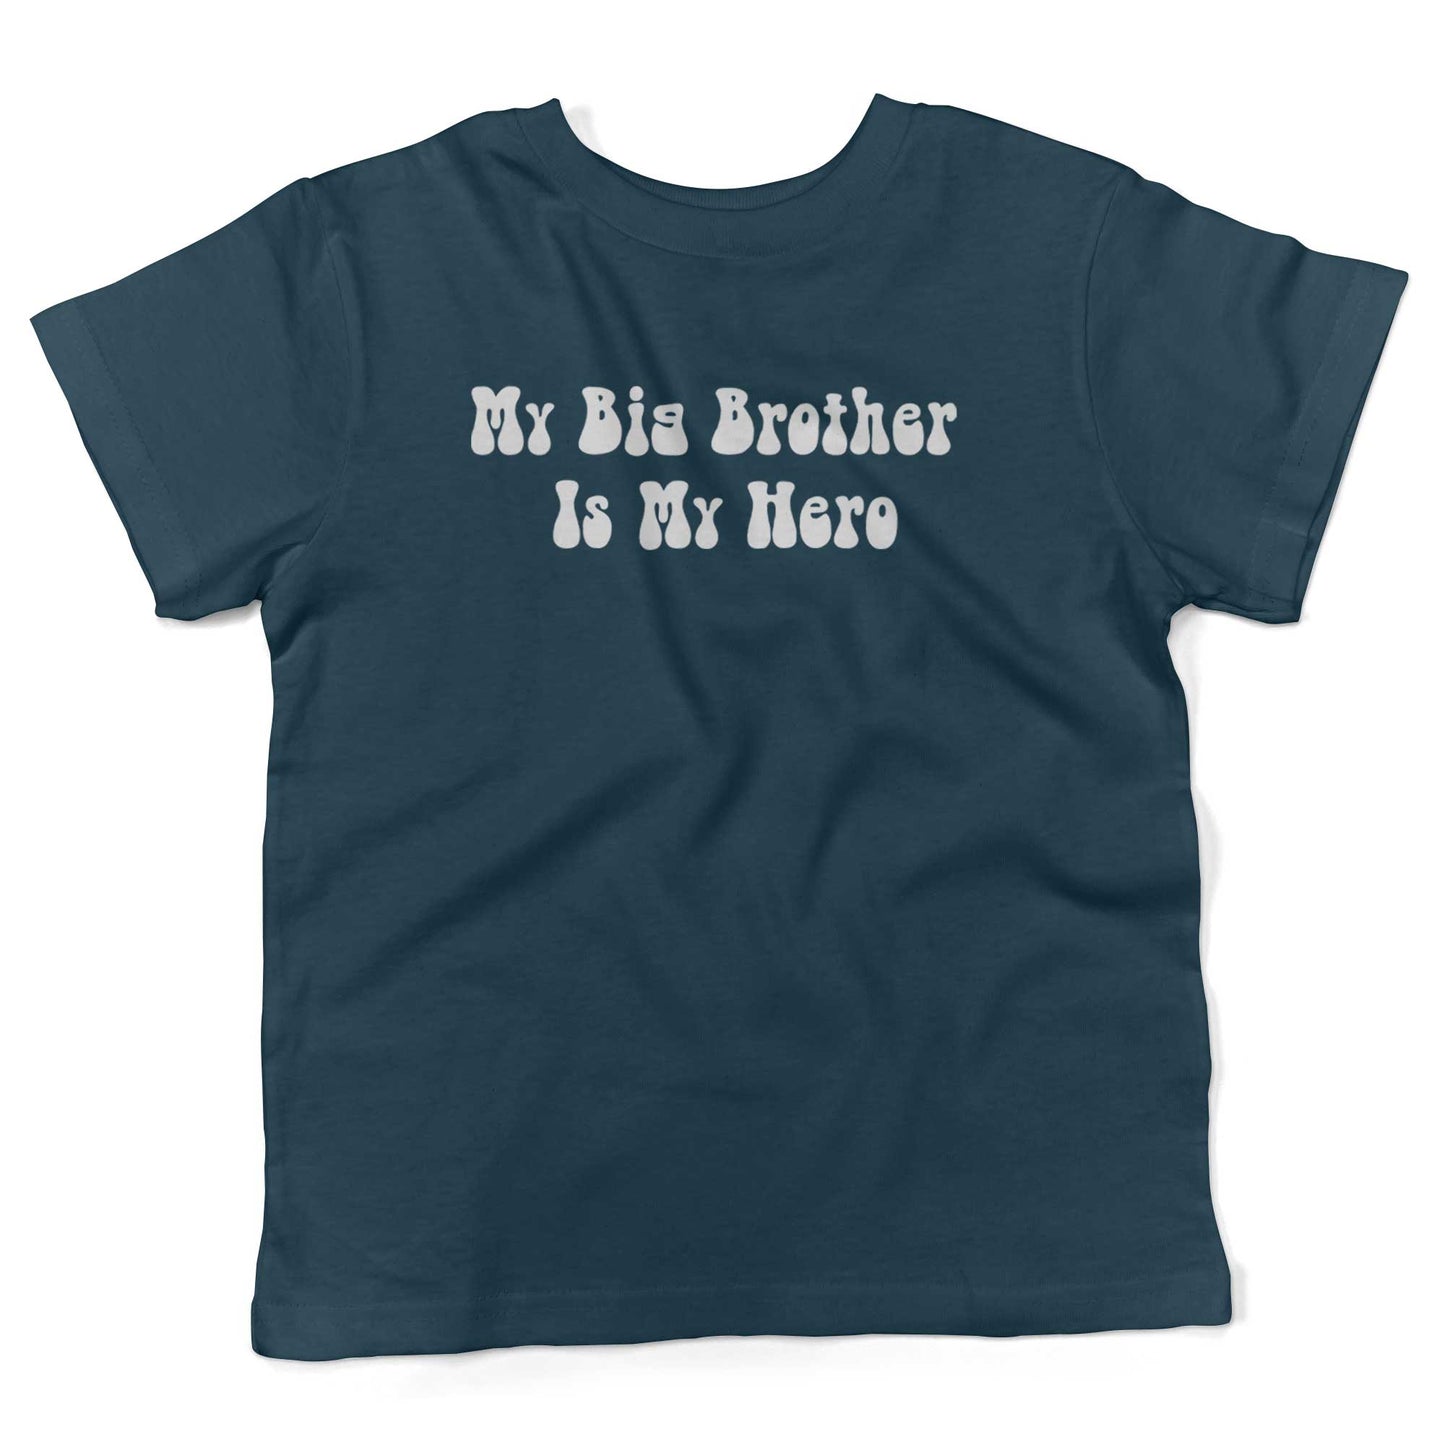 My Big Brother Is My Hero Toddler Shirt-Organic Pacific Blue-2T